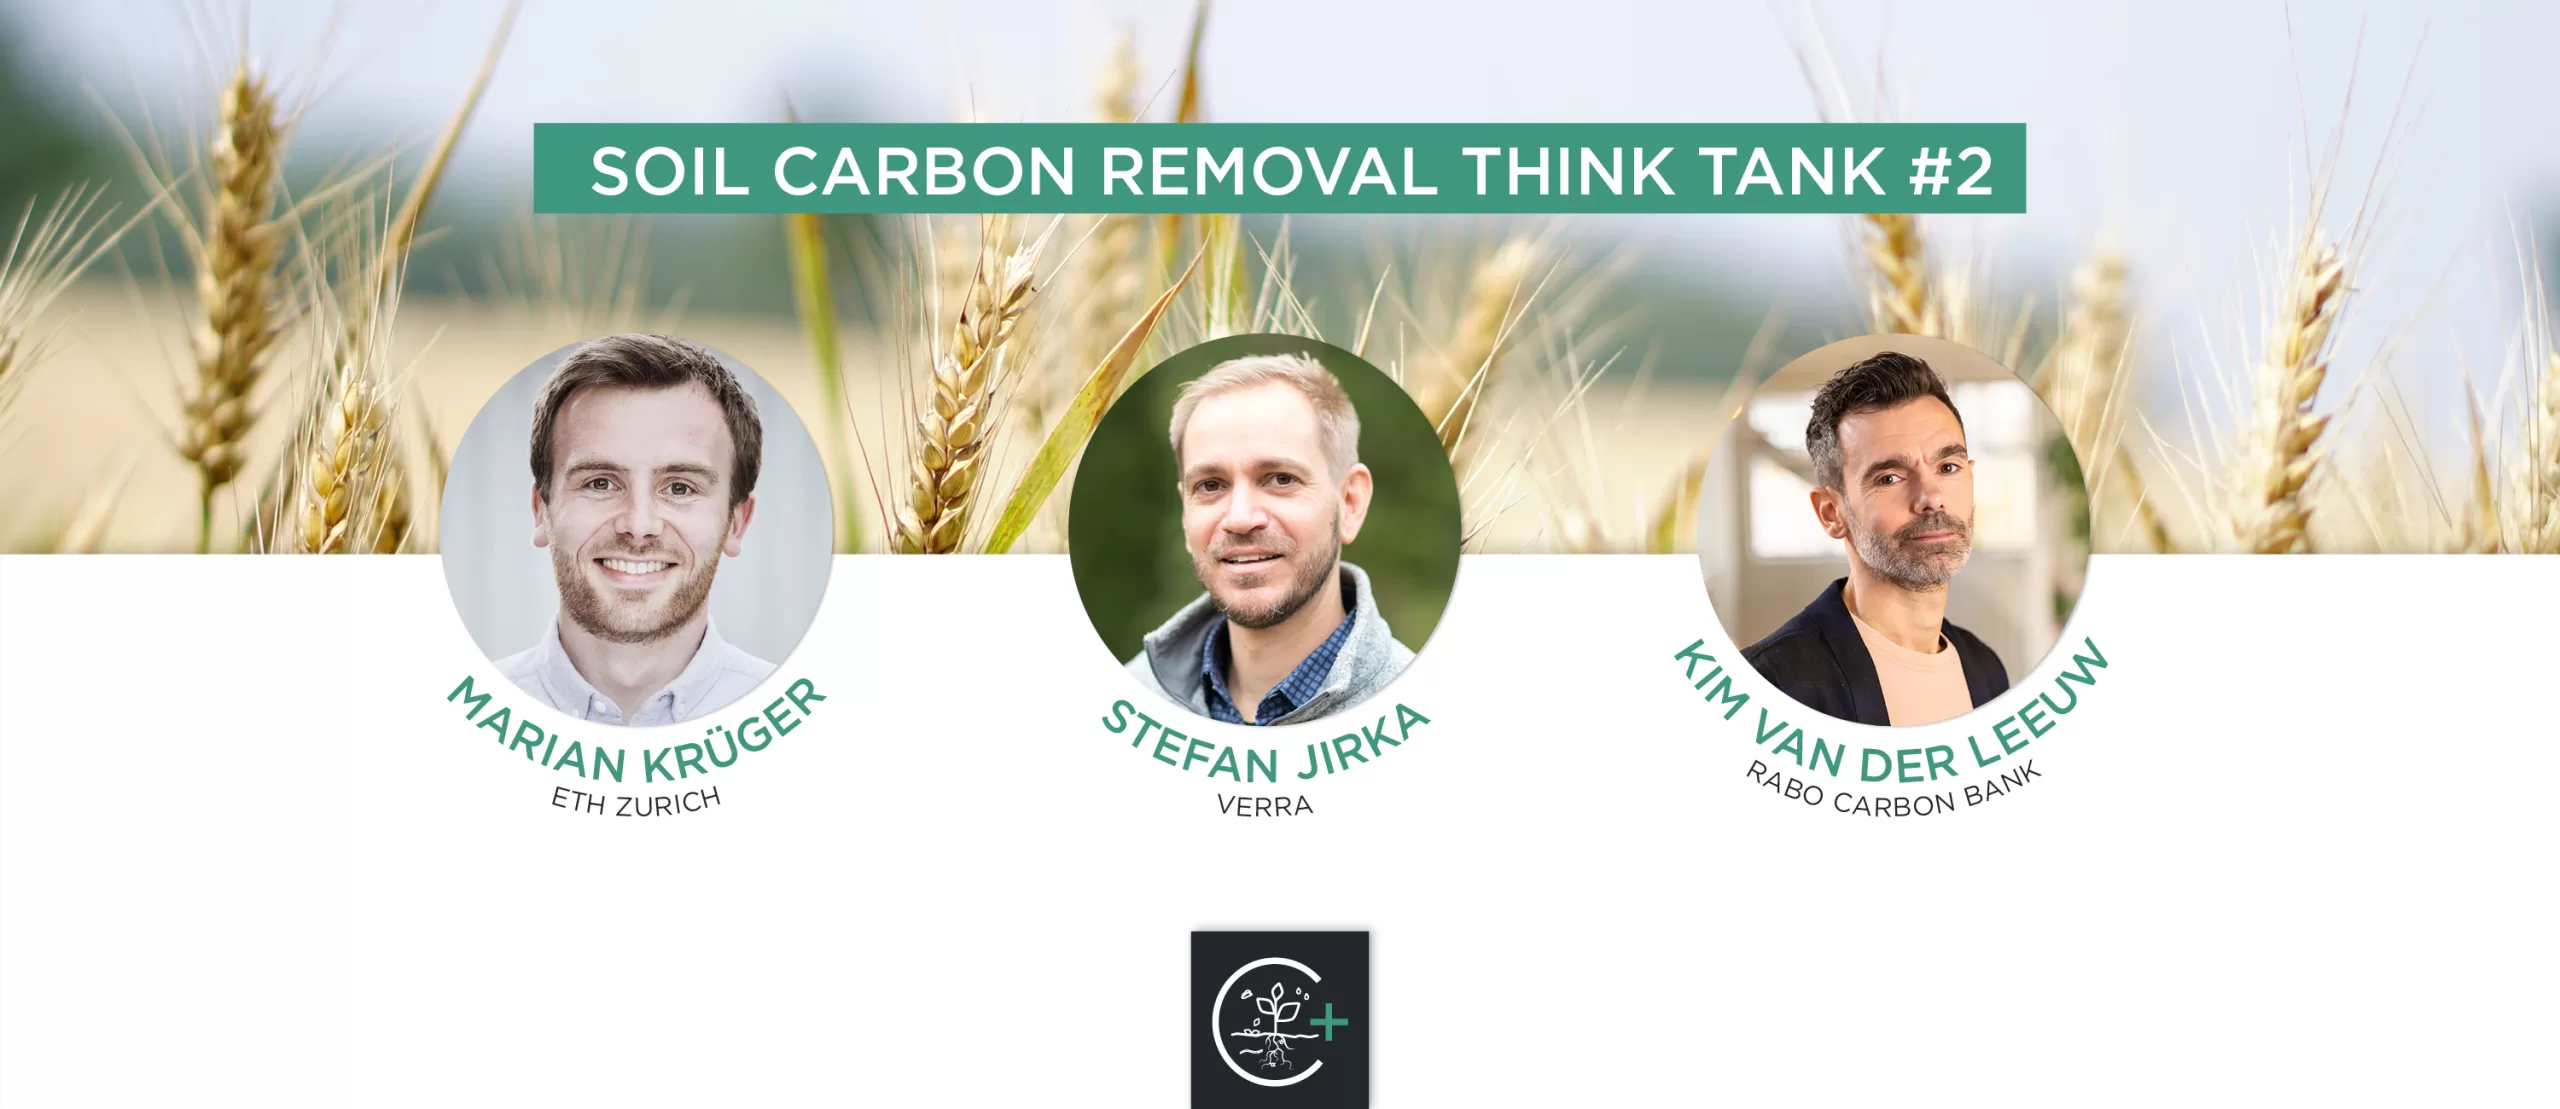 What Makes a High-Quality Carbon Credit from Regenerative Agriculture?